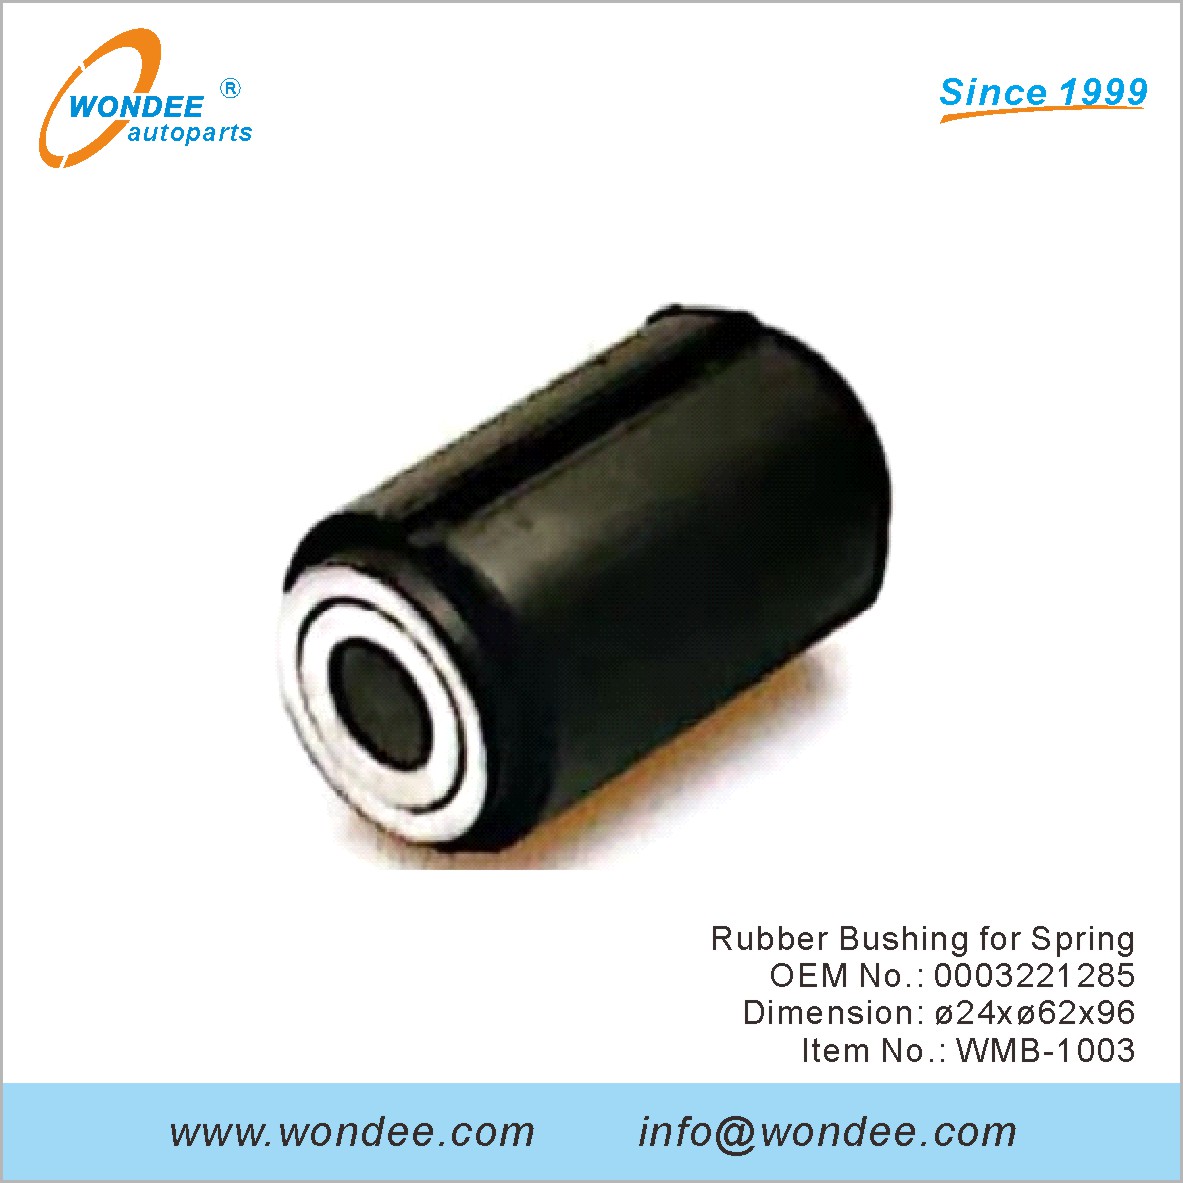 Rubber Bushing for Spring OEM 0003221285 for Benz from WONDEE